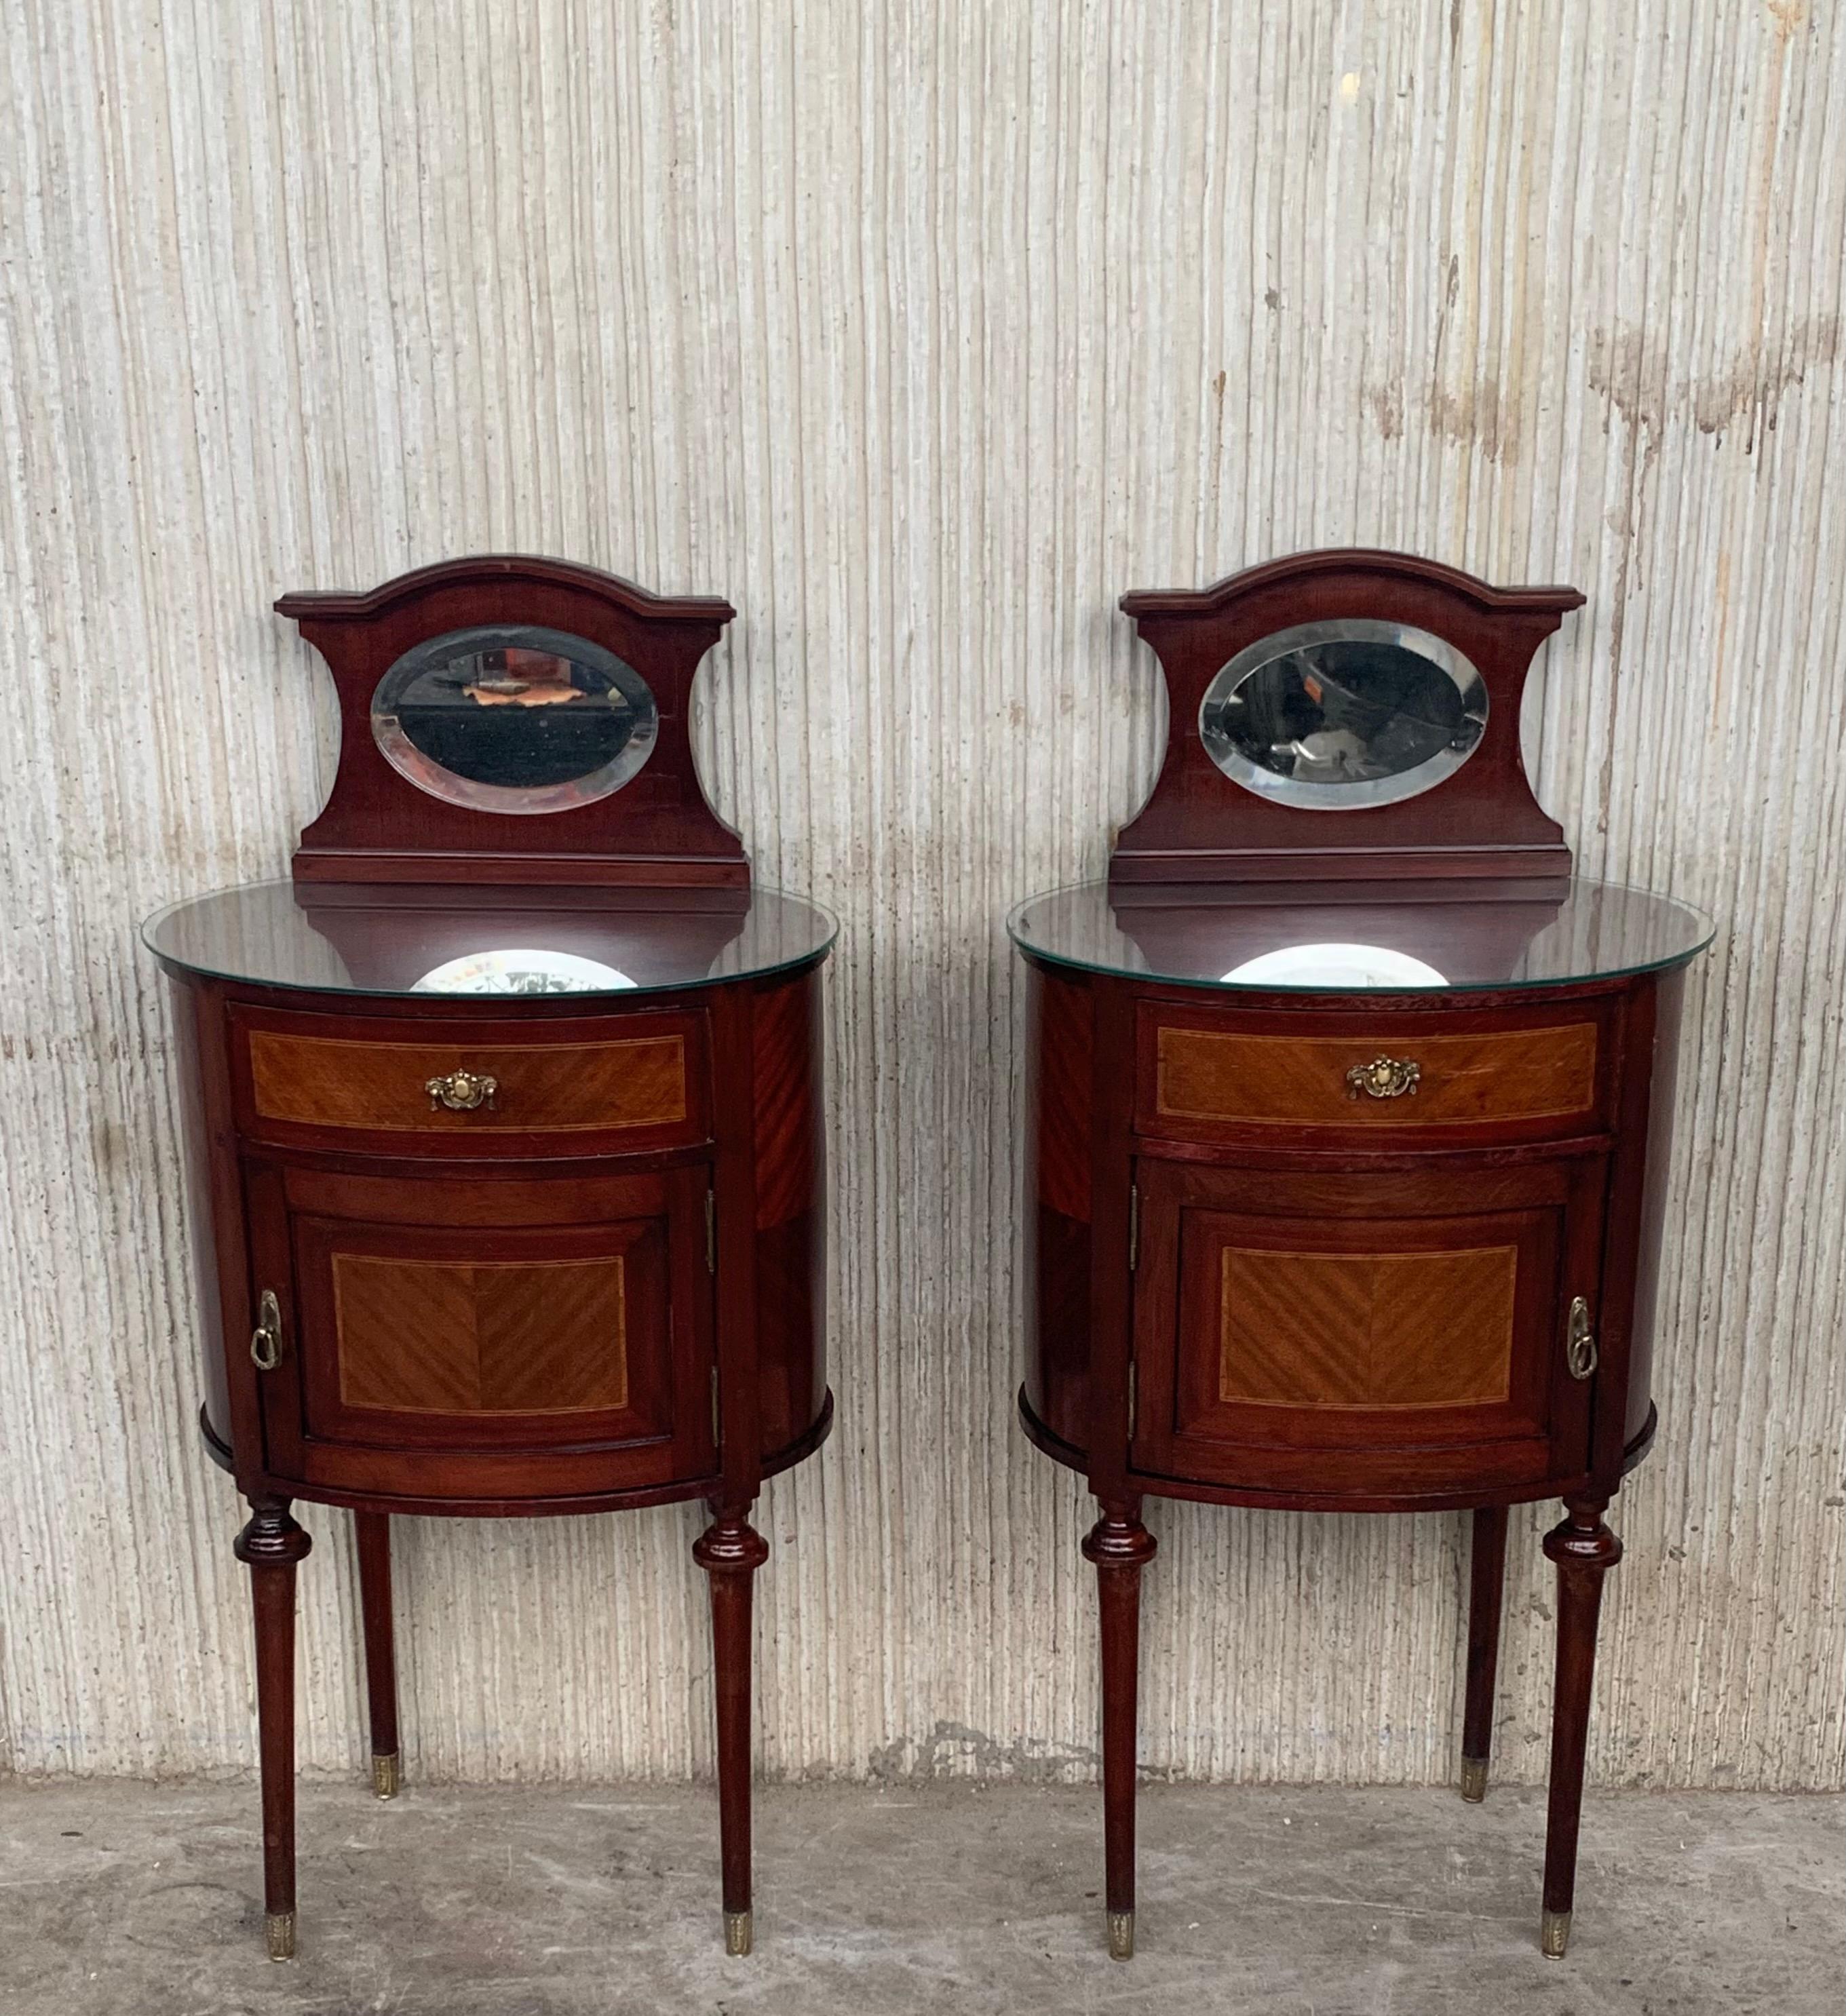 Louis XVI style pair of Marquetry nightstands with bronze crest one drawer and one compartment.
Originals handles and garniture.
Completely restored.

Total height : 42.12 in
Height to the tabletop: 32.28 in.